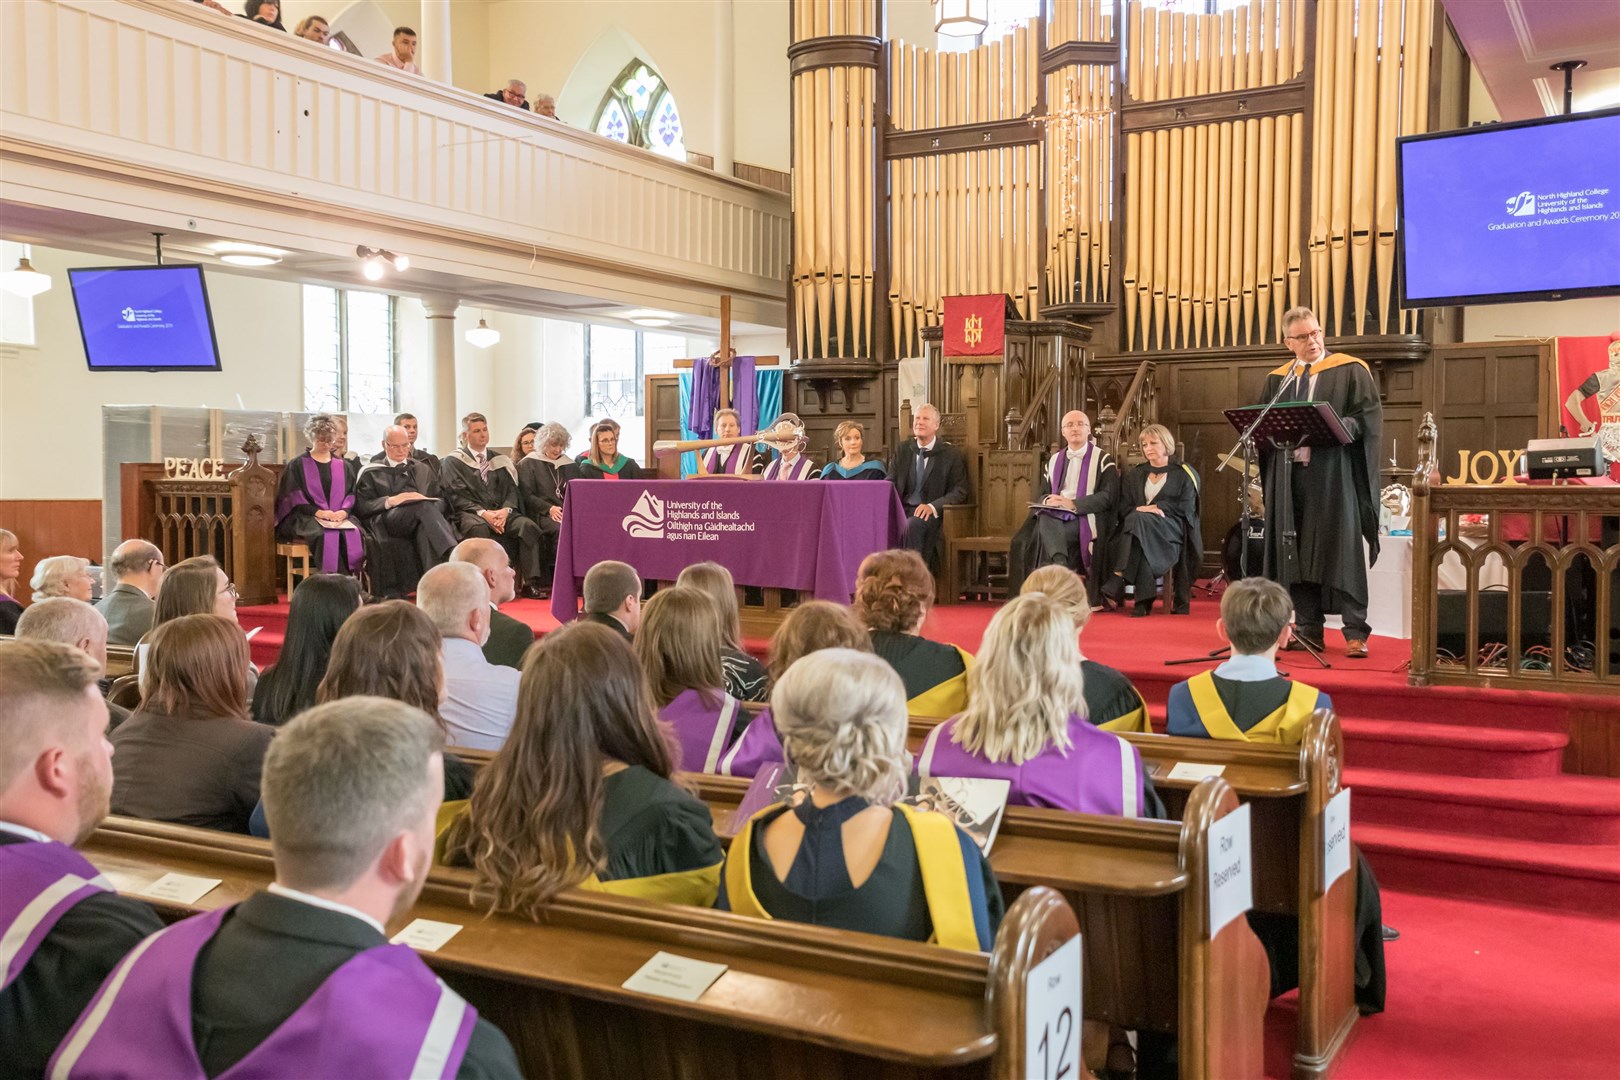 UHI college graduations in 2019. Photo by Duncan McLachlan